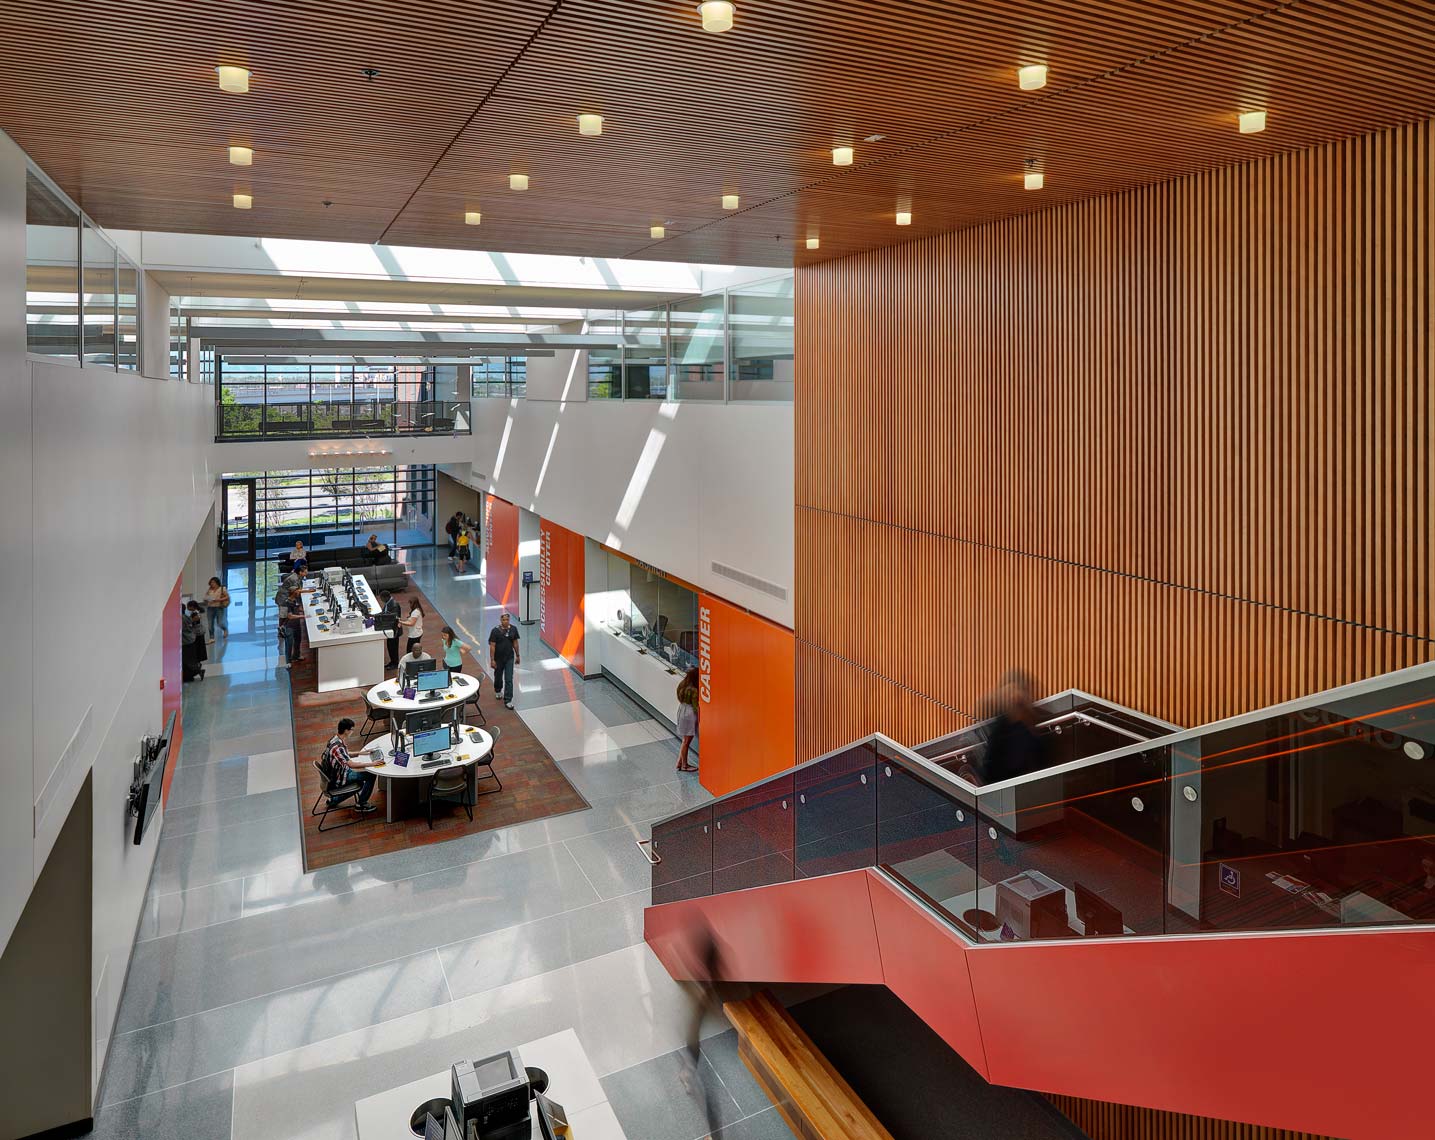 Community College of Denver | Maylone Architectural Photo